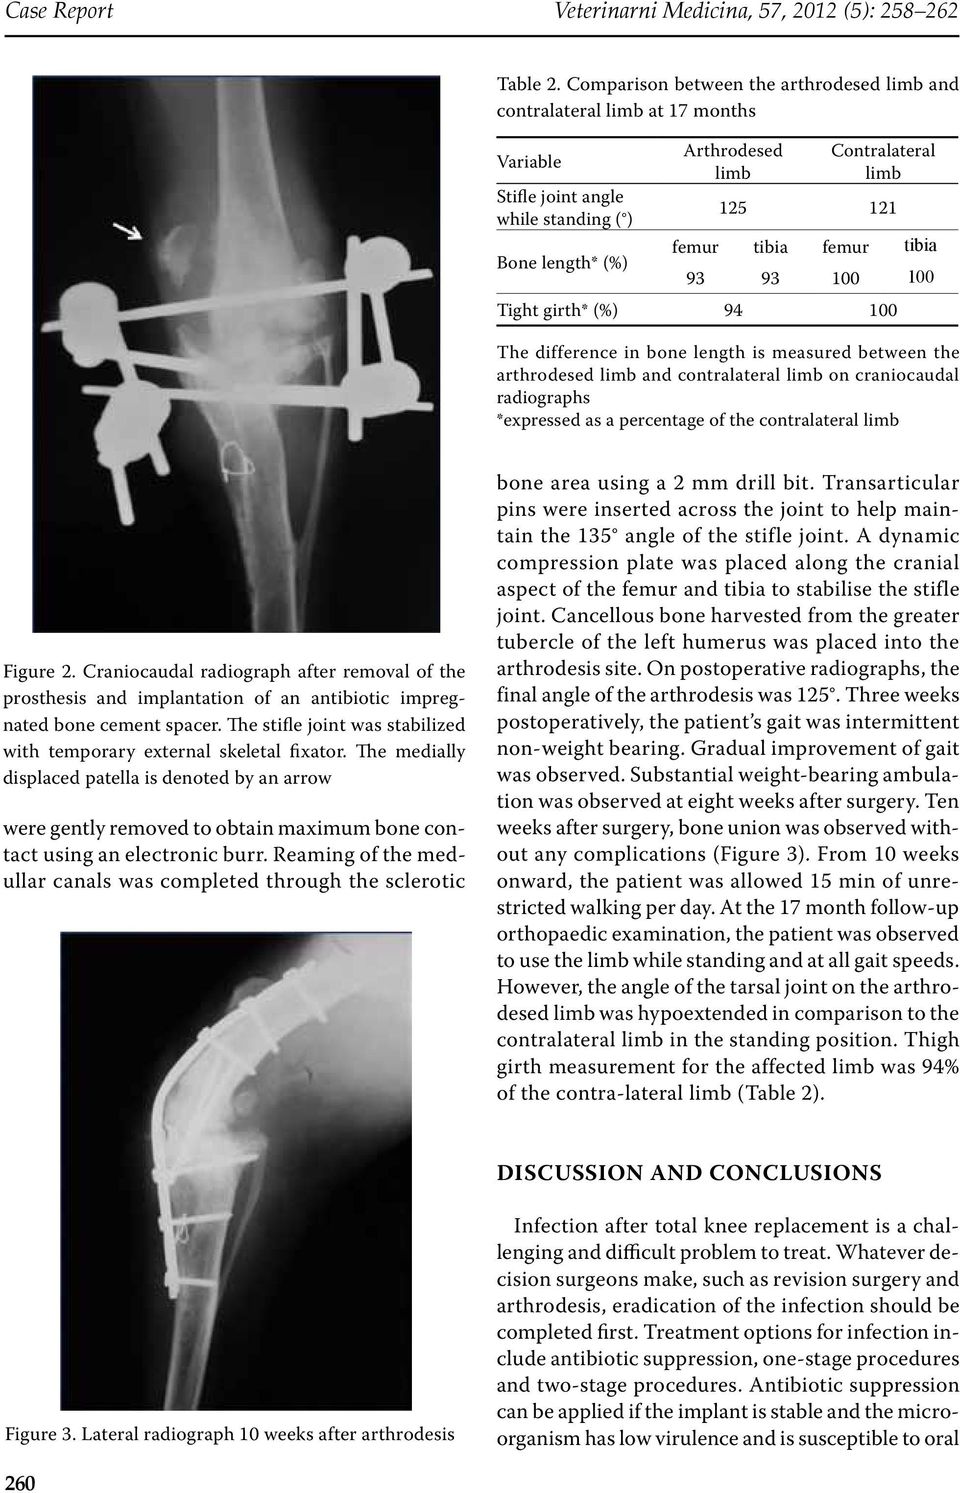 length* (%) 93 93 100 100 Tight girth* (%) 94 100 The difference in bone length is measured between the arthrodesed limb and contralateral limb on craniocaudal radiographs *expressed as a percentage